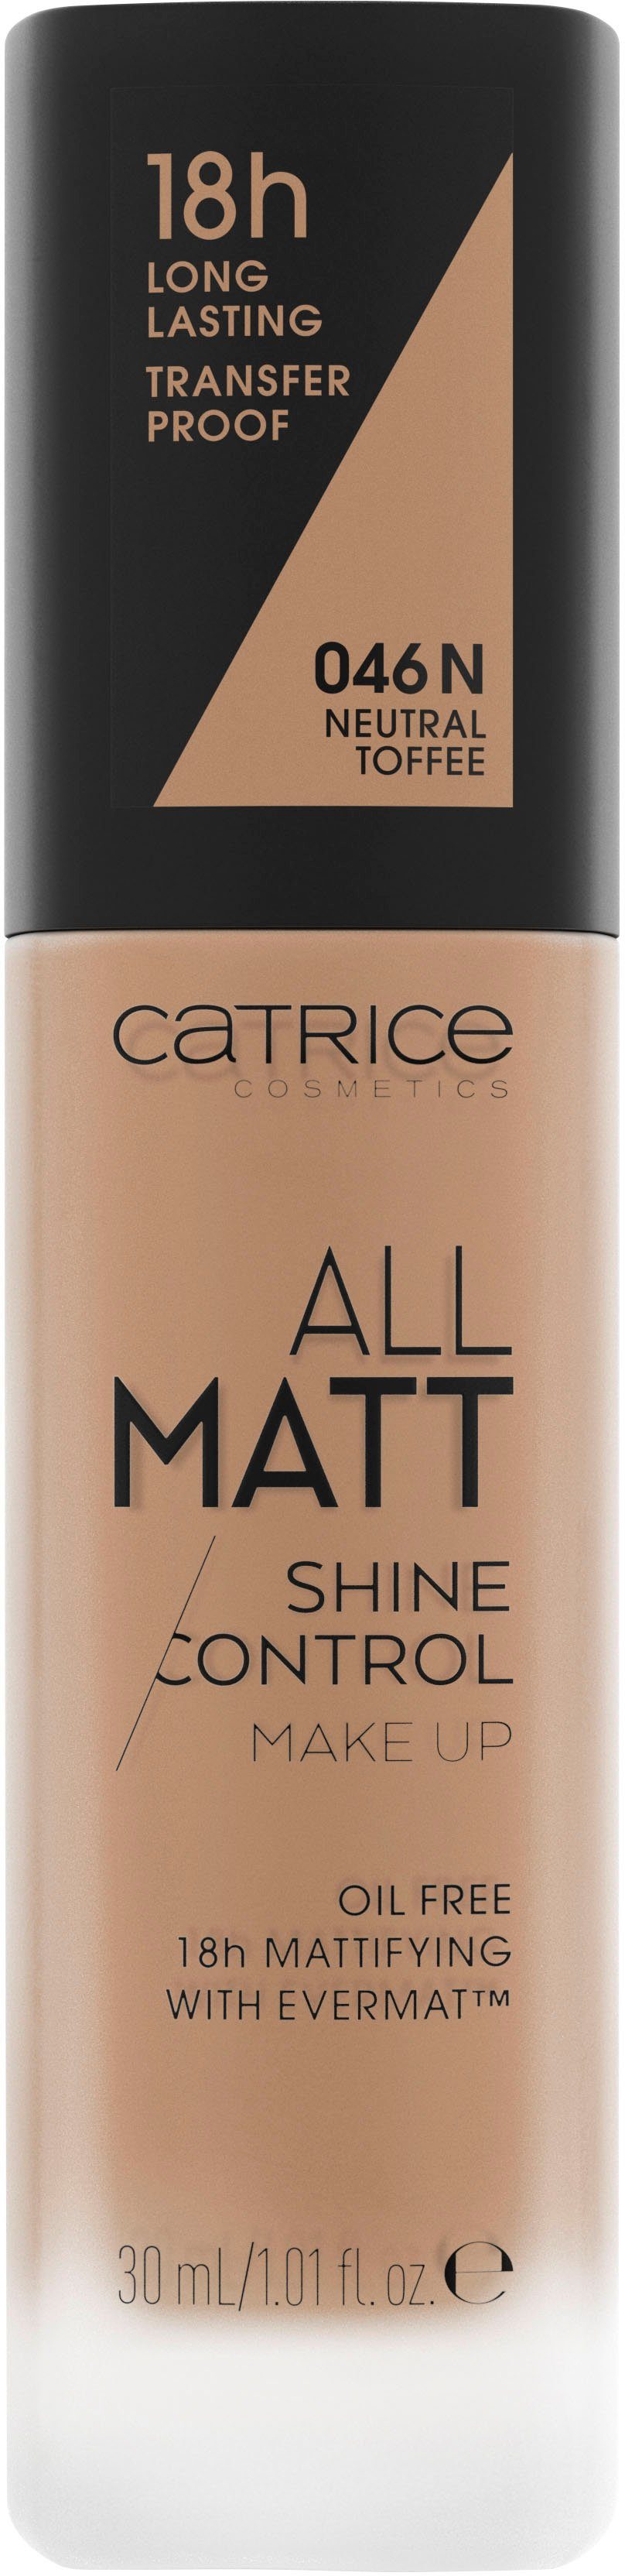 Control Matt All Toffee Up Catrice Shine Foundation Make Neutral